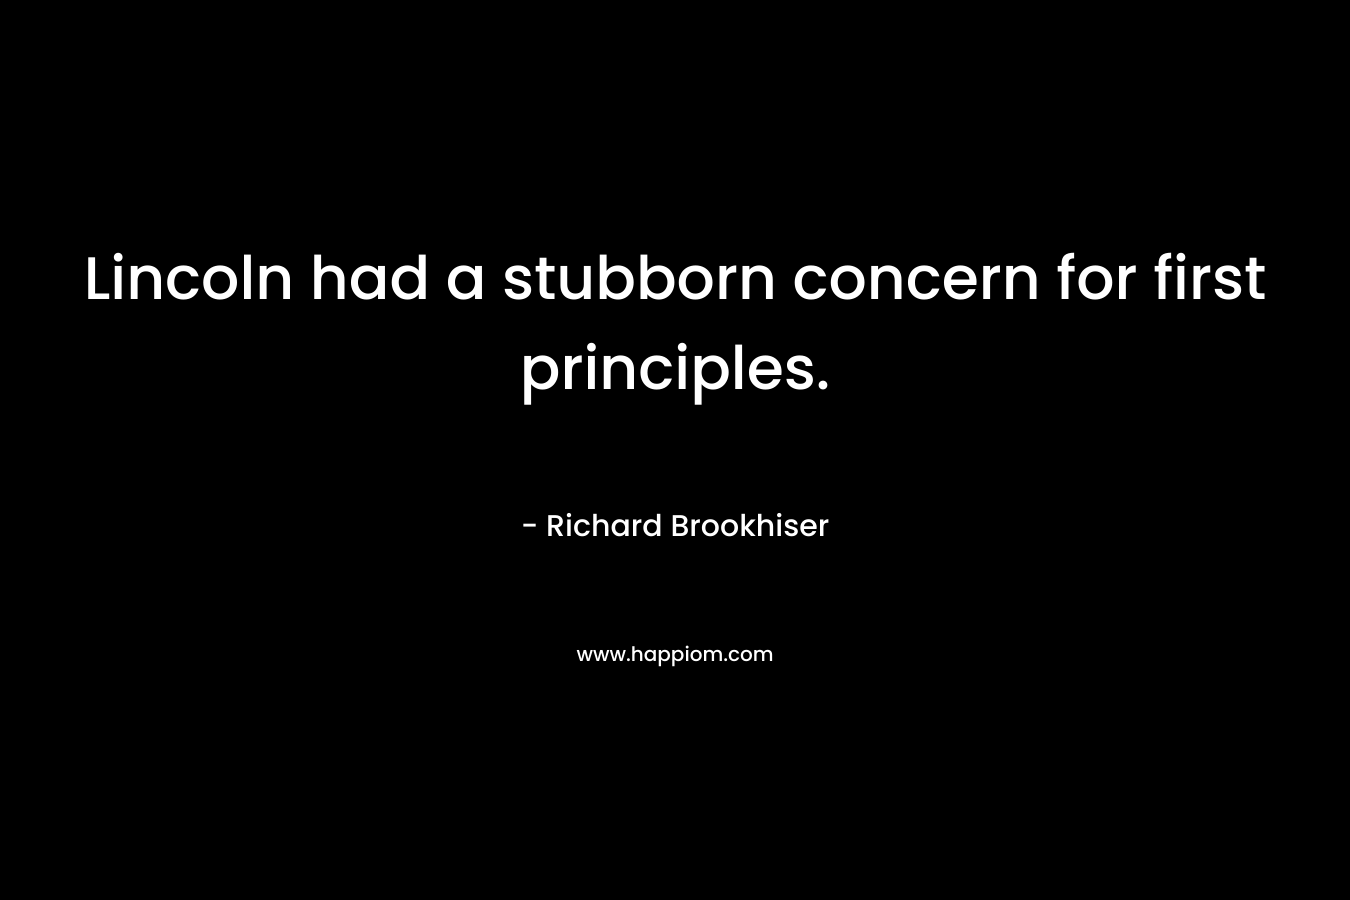 Lincoln had a stubborn concern for first principles. – Richard Brookhiser